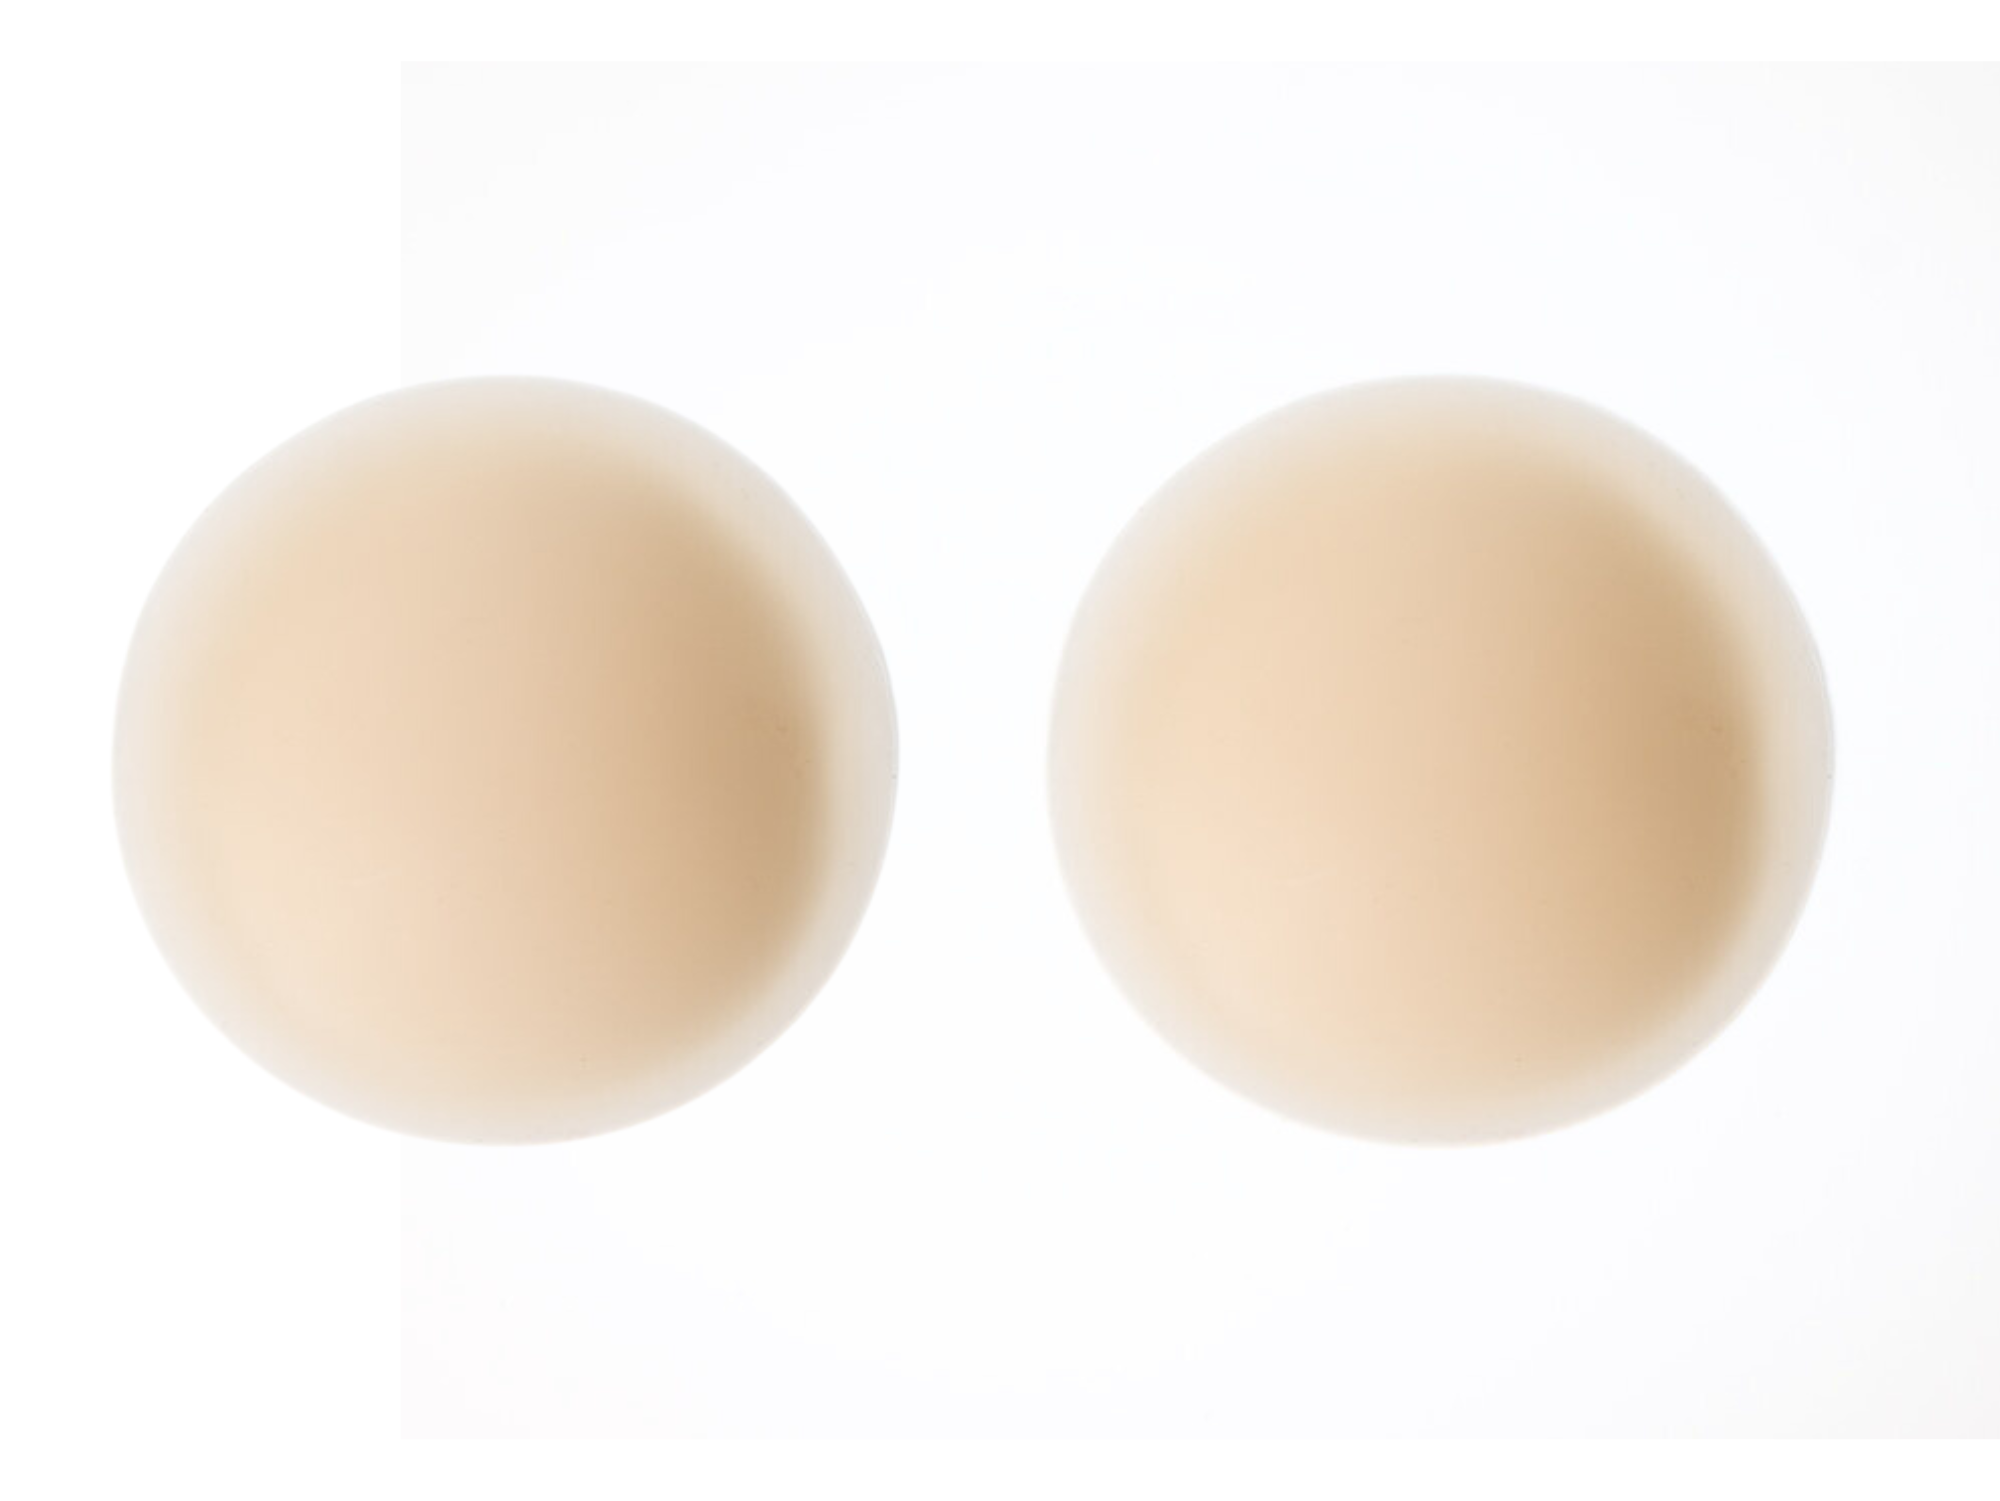 A pair of light beige silicone nipple pasties on a white background.